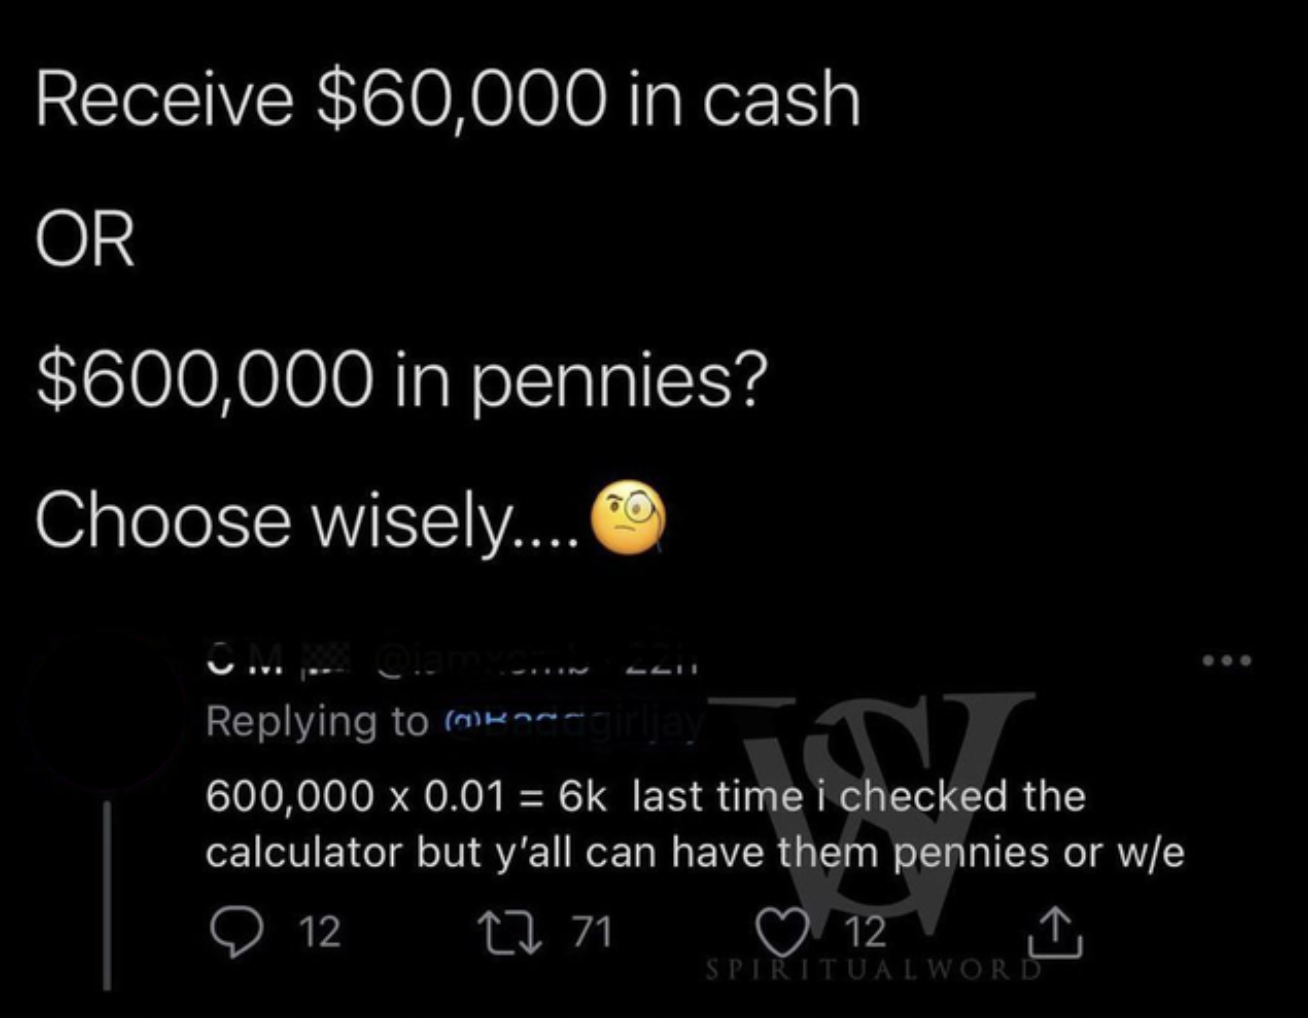 Confidently incorrect - Receive $60,000 in cash Or $600,000 in pennies? Choose wisely....